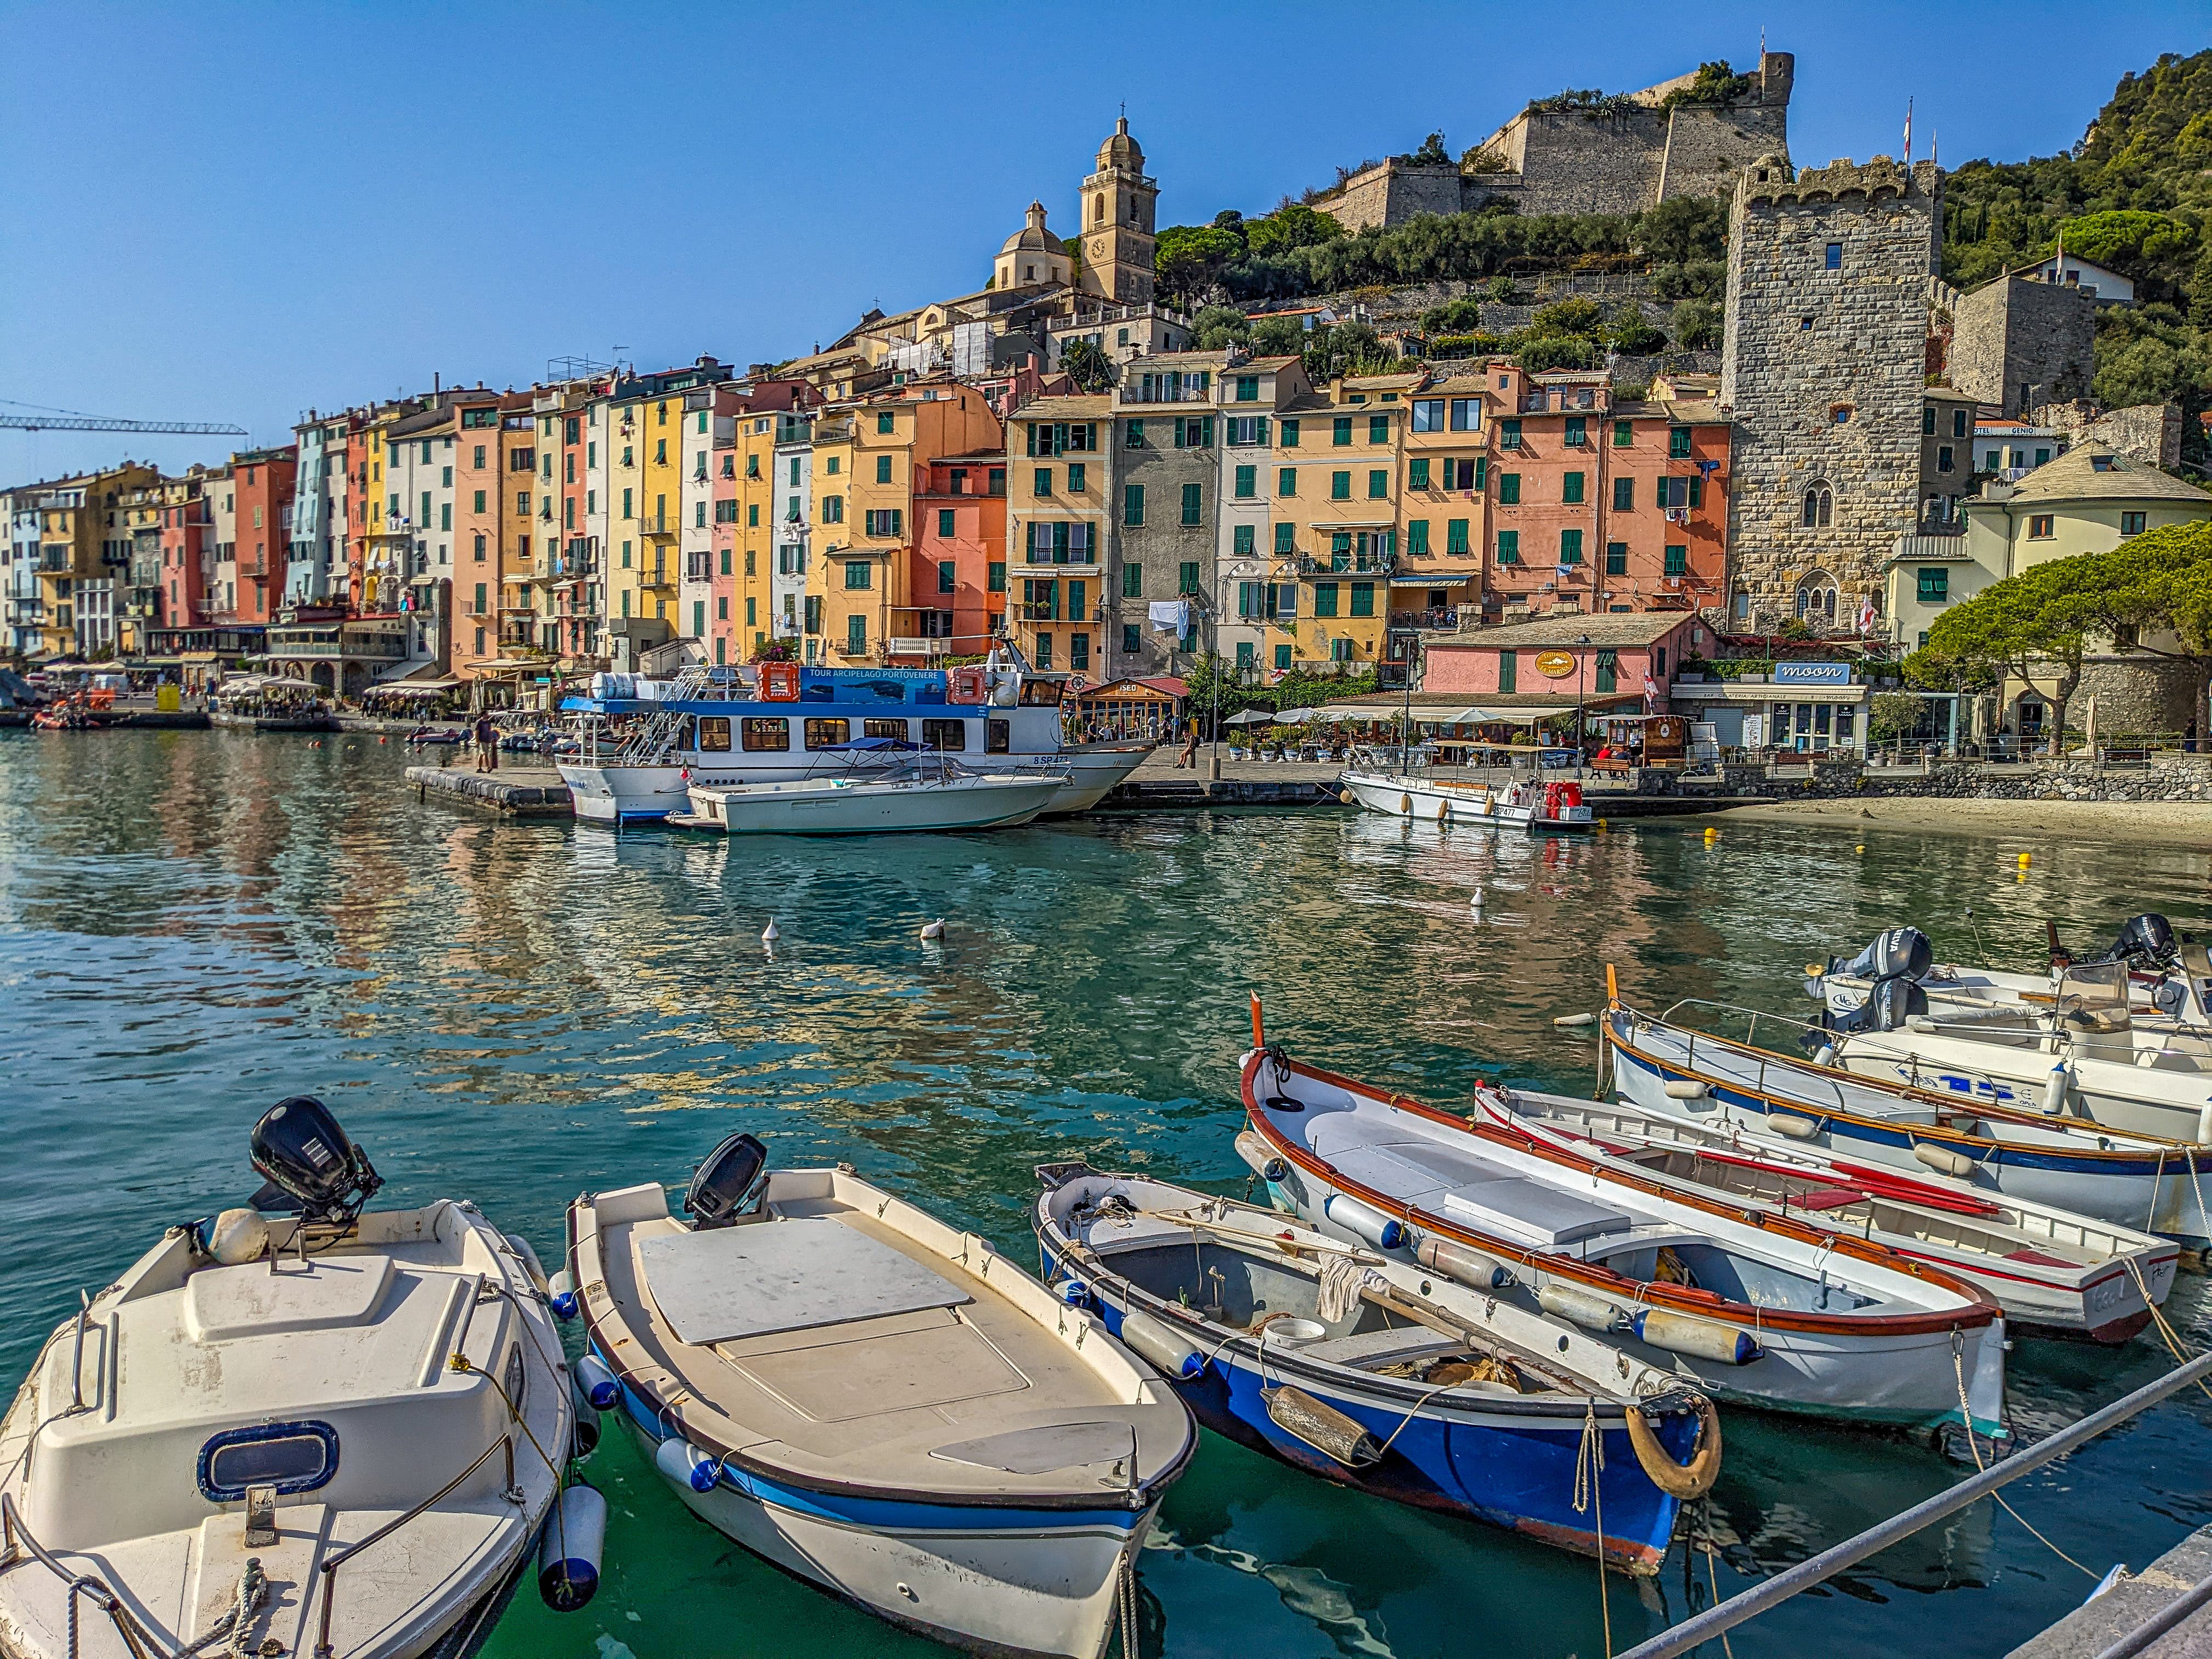 Tired of a dreary winter? Let photos of Italy's Cinque Terre